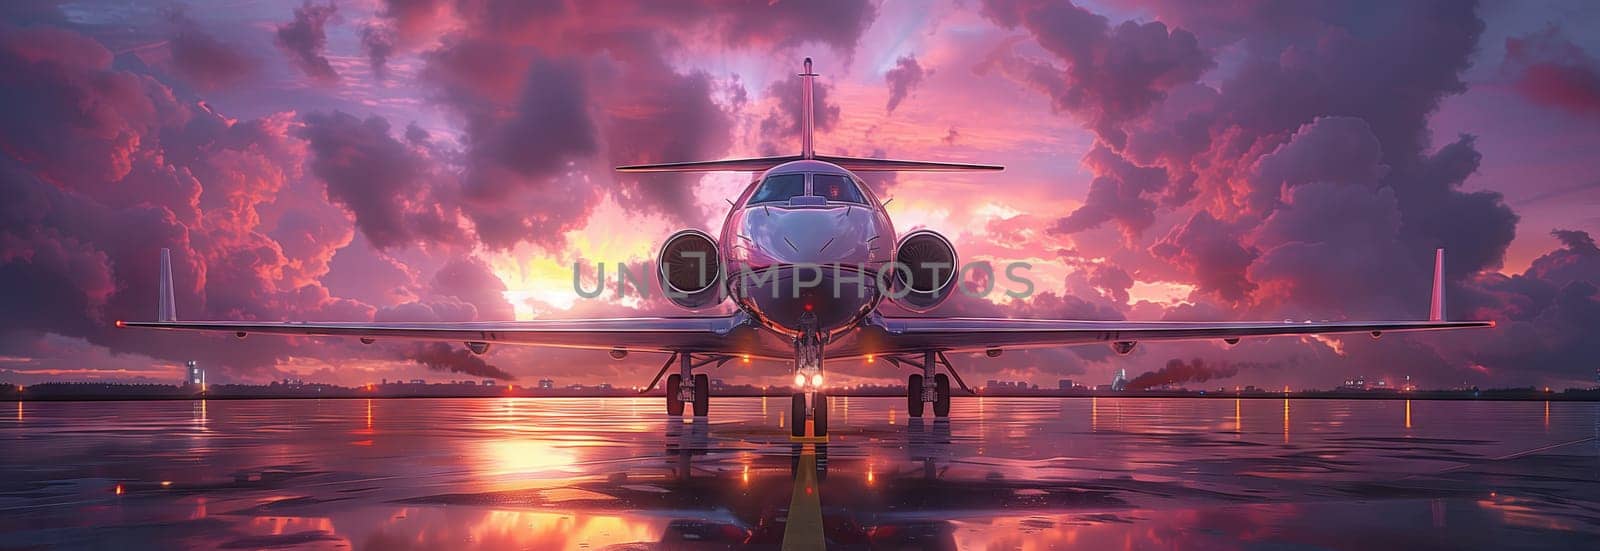 a plane is sitting on a wet runway at sunset by richwolf